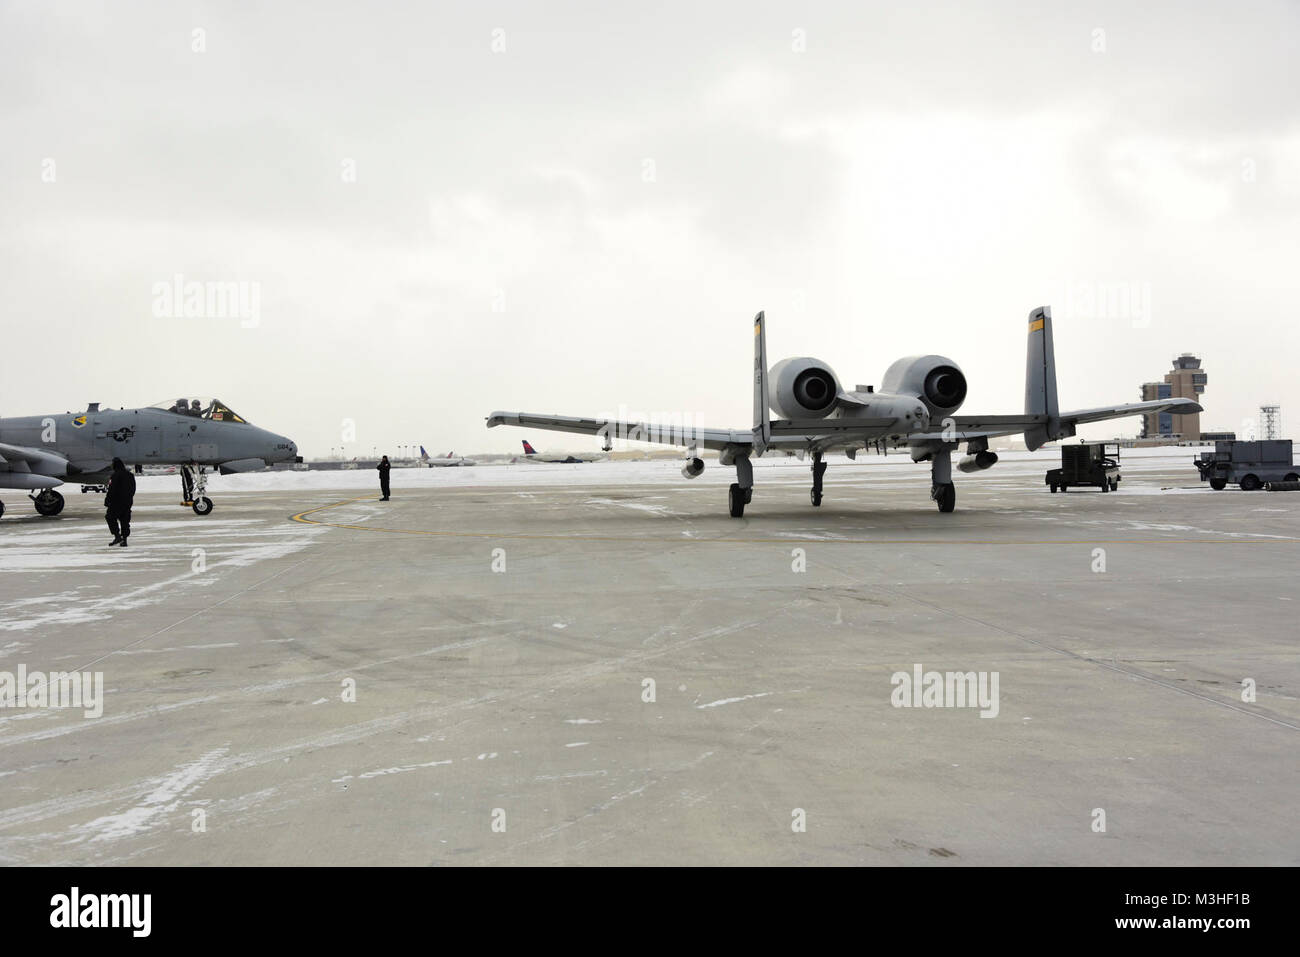 Two A-10C Thunderbolt IIs taxi for departure at Minneapolis-St. Paul Air Reserve Station, Minn., Feb. 5, 2018. The A-10 Demo Team visited Minneapolis to support an Air Force Heritage Flight  flyover for Super Bowl 52. (U.S. Air Force Stock Photo